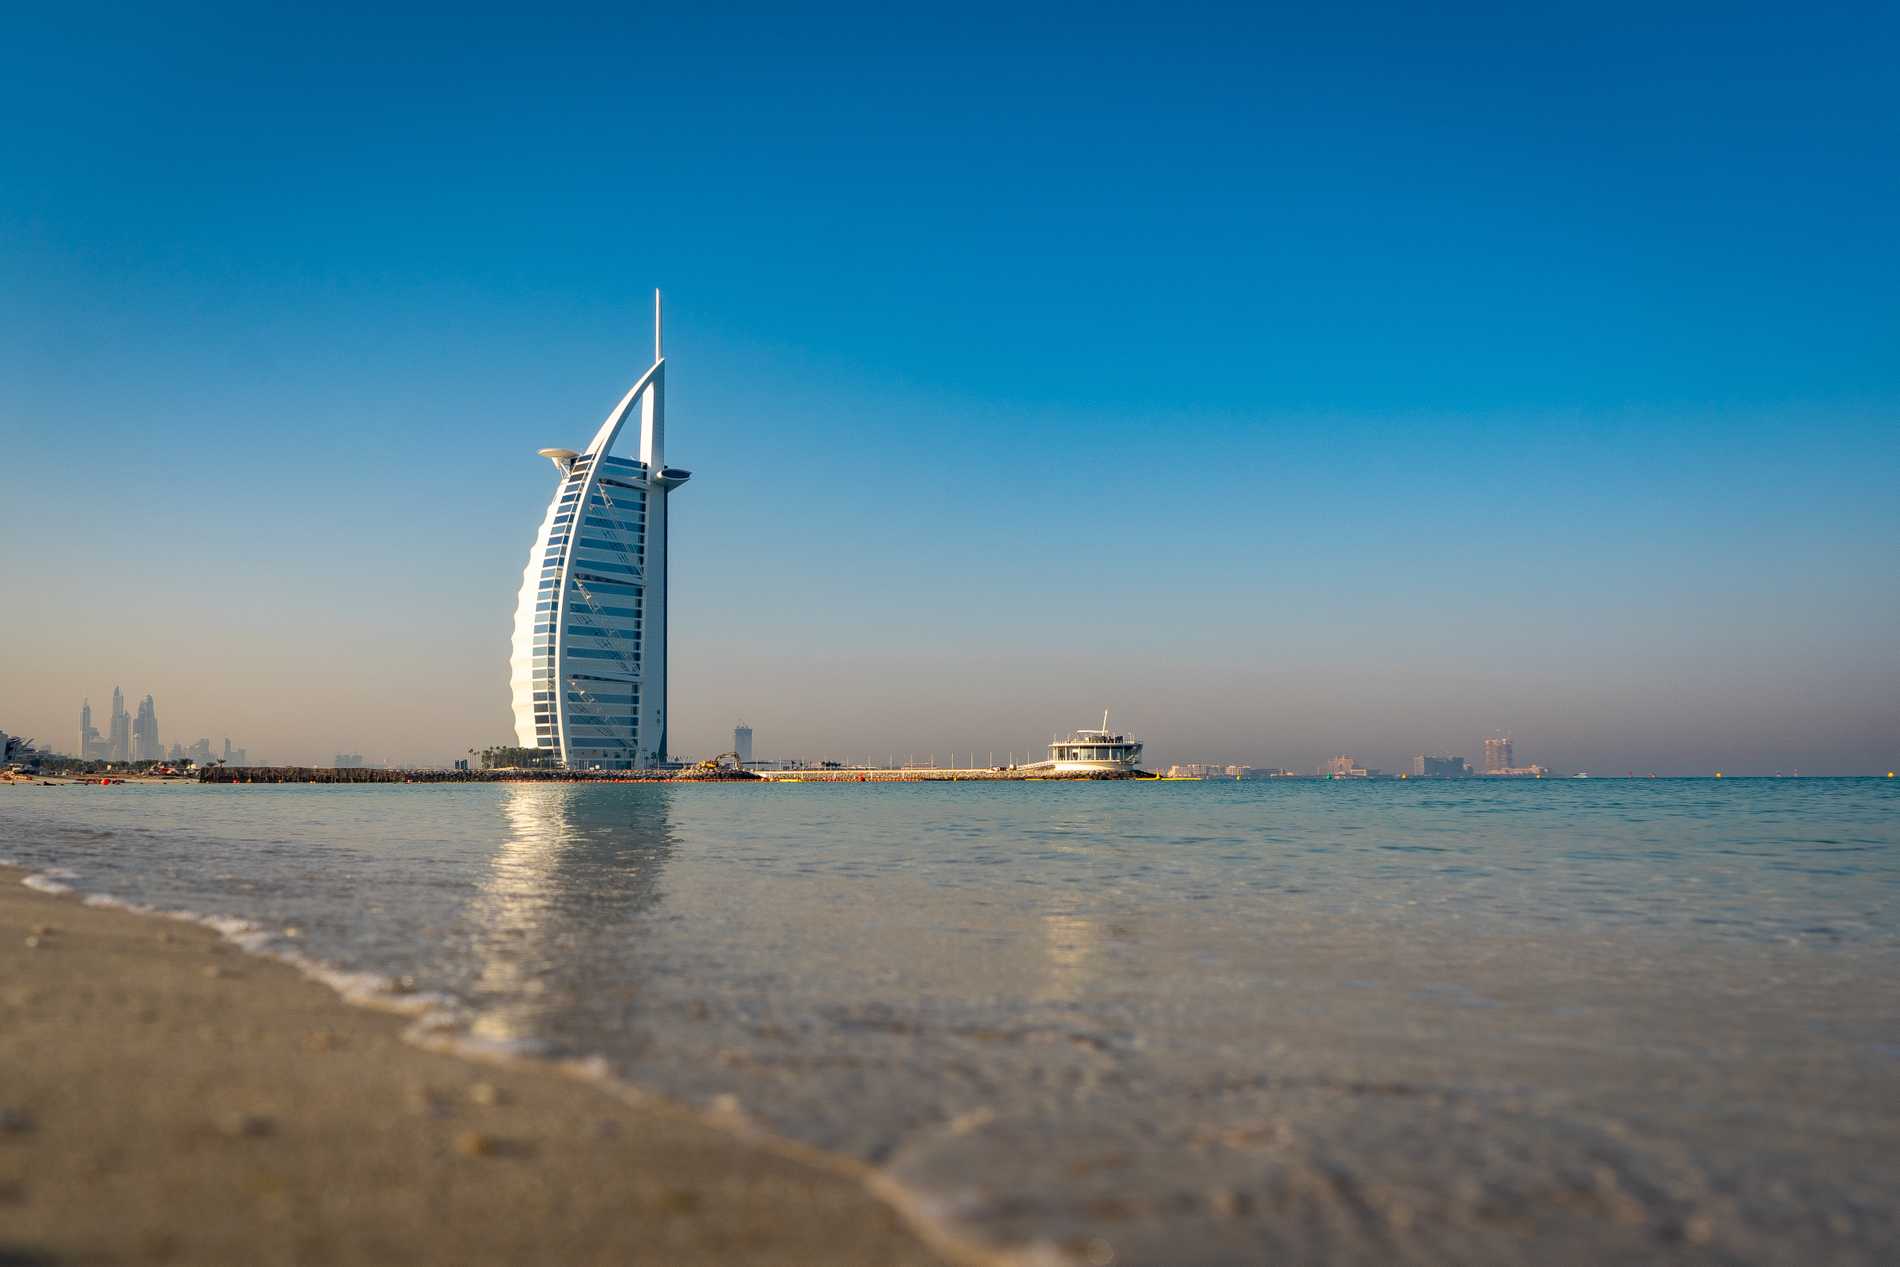 The Burj Al Arab Jumeirah, one of the tallest hotels in the world, looks like a sail rising from the sea.